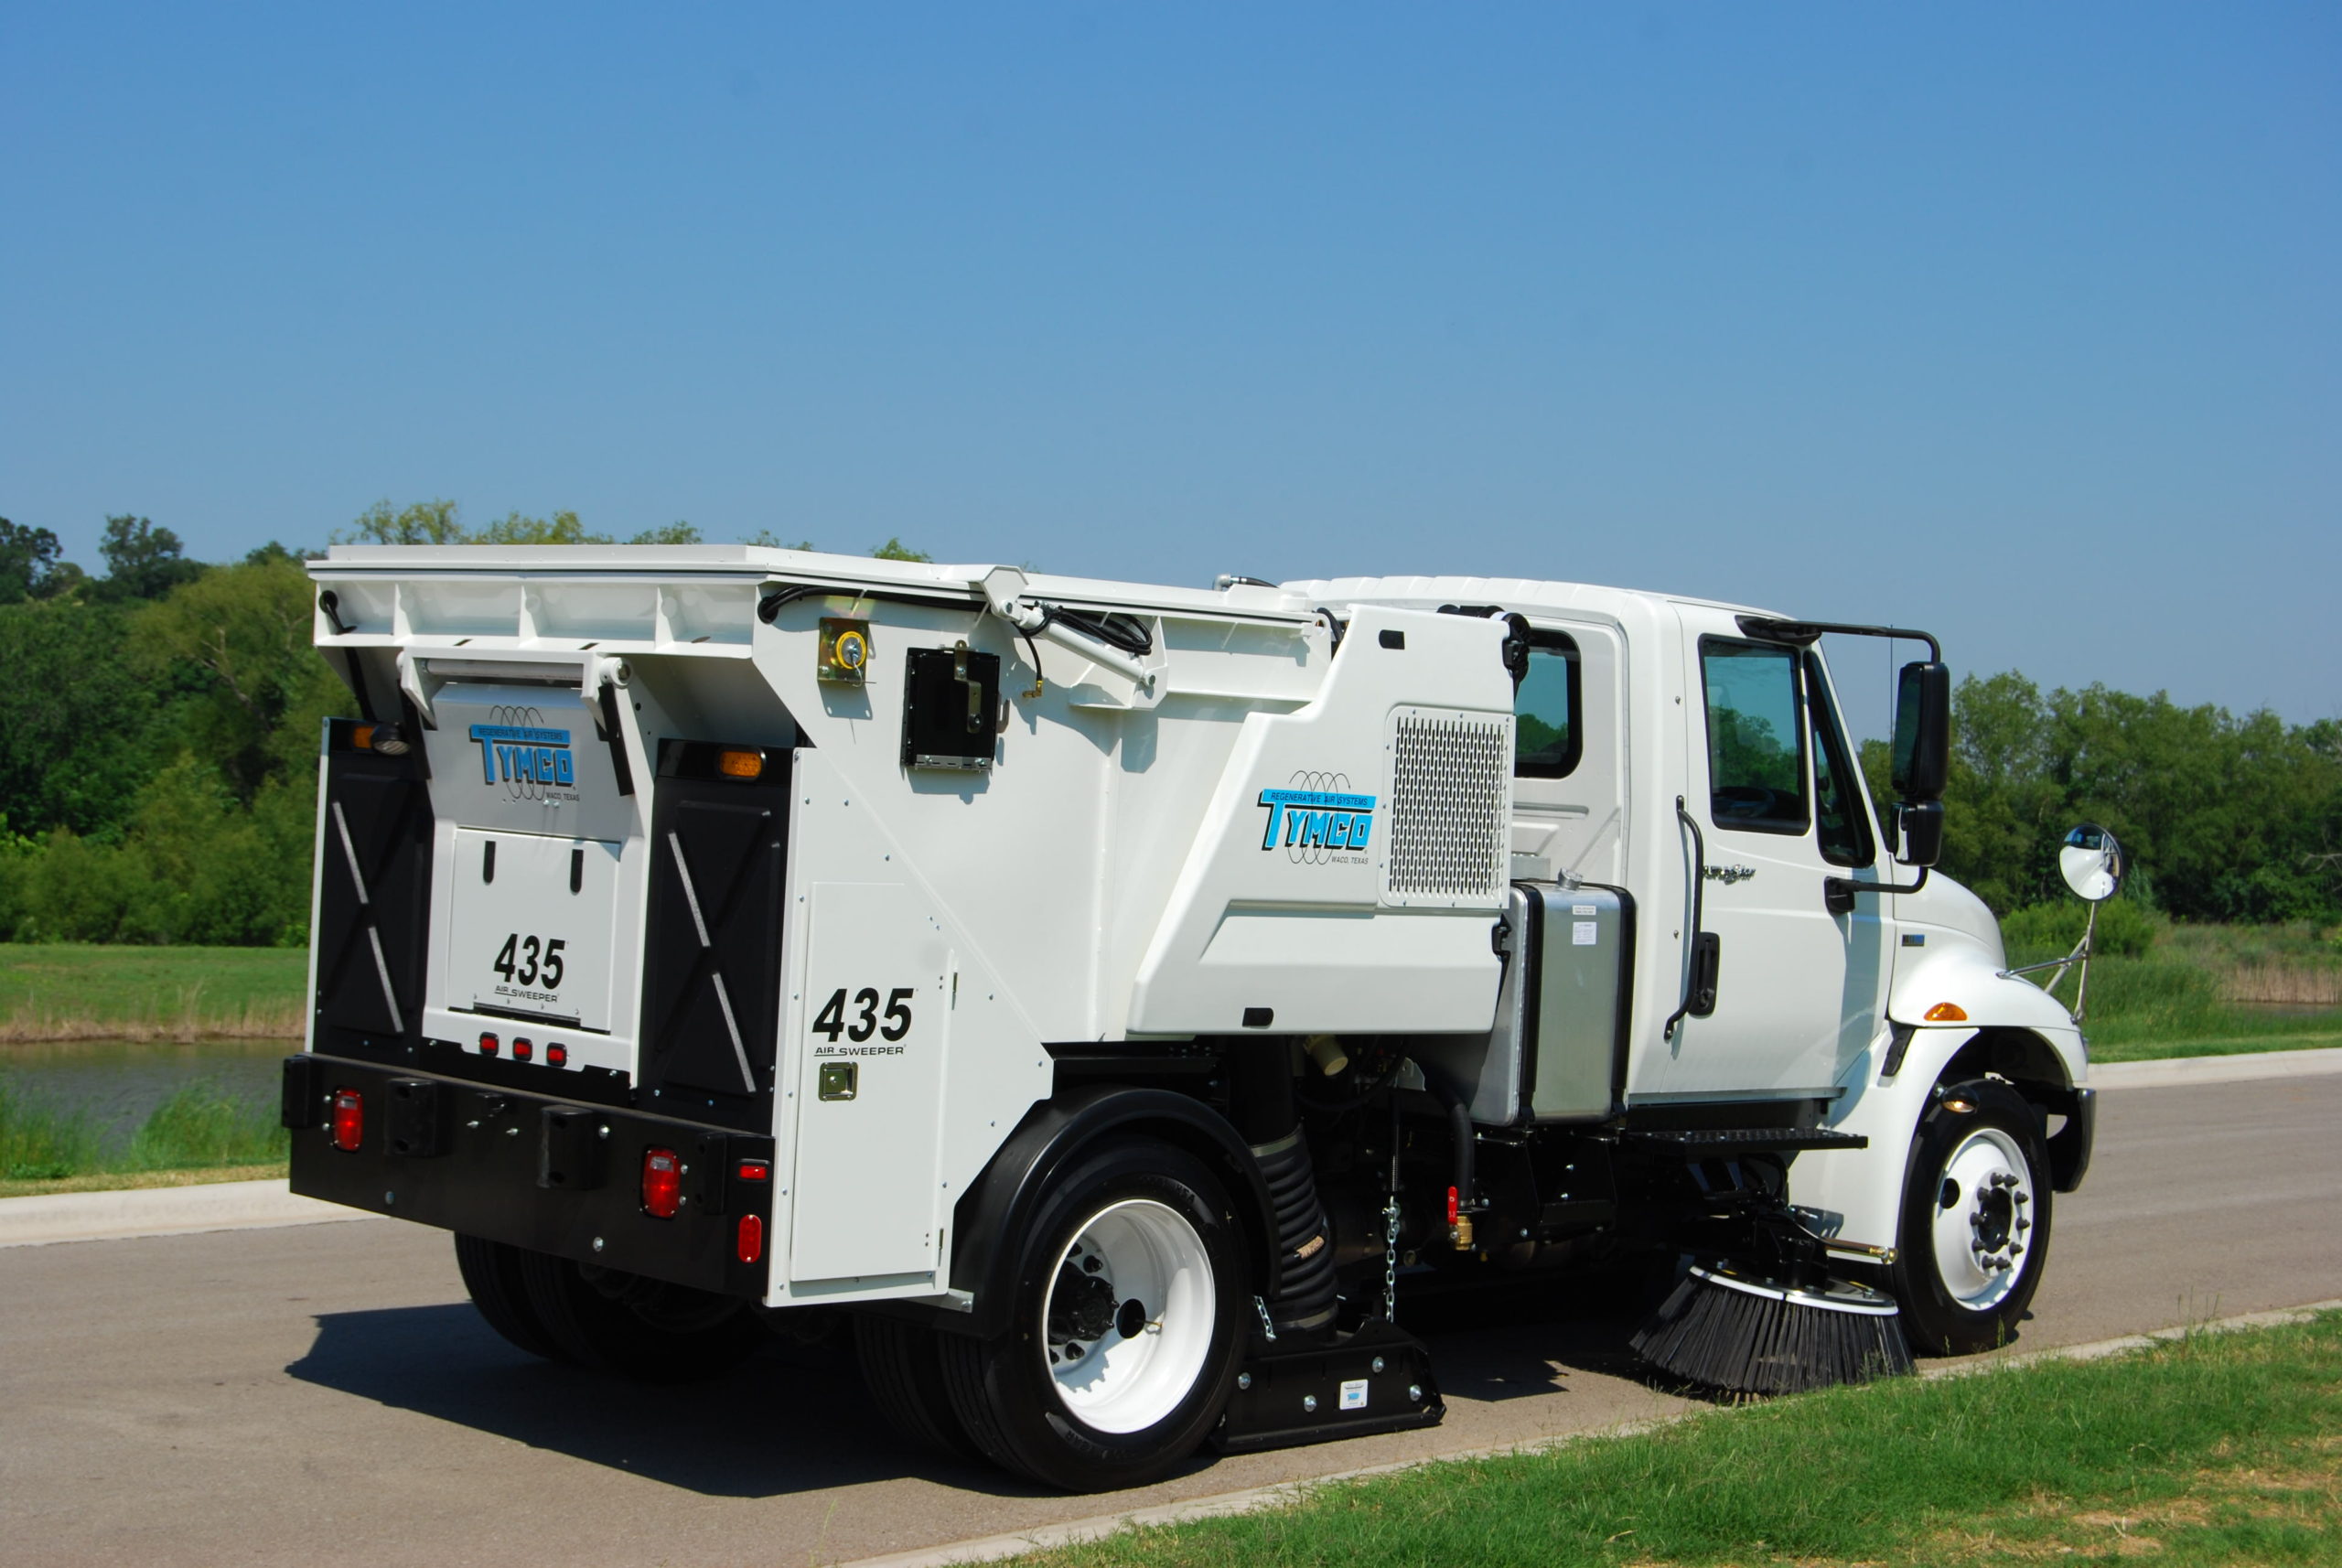 Los Angeles Street Cleaning Schedule 2022 Street Sweeping Schedules: Find Out When Your Street Is Swept